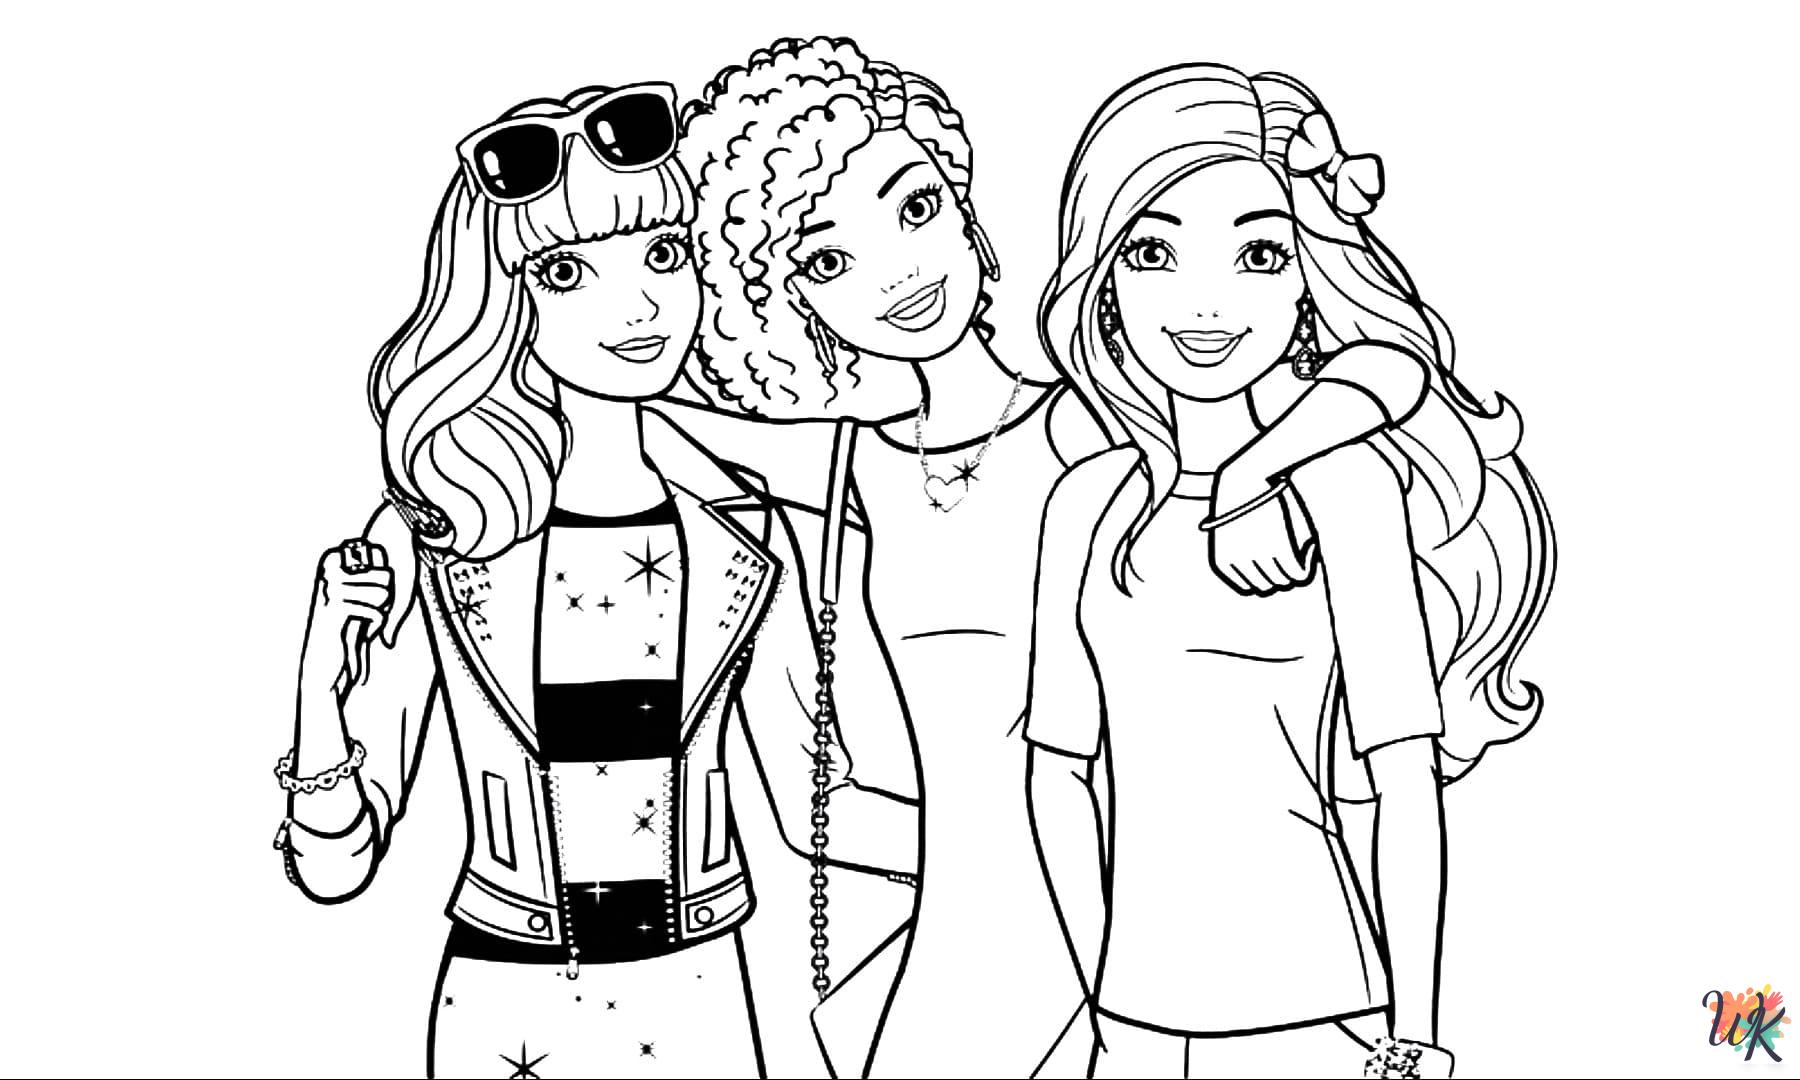 printable Barbie coloring pages for adults